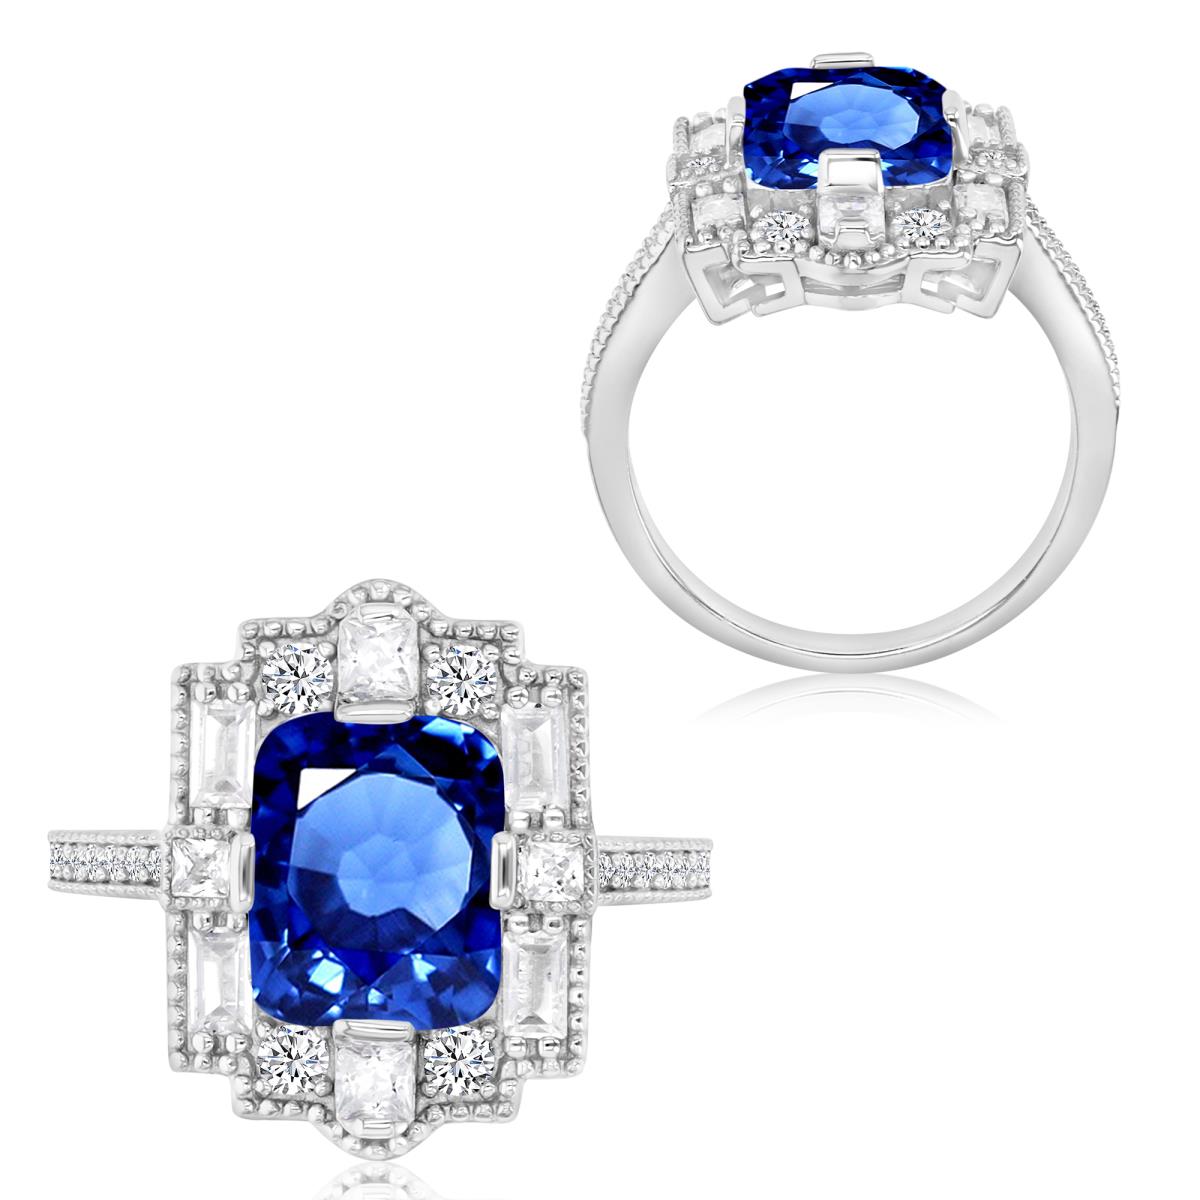 Sterling Silver Rhodium 20X14MM Polished Cr Blue & Cr White Sapphire Vintage Cushion Cut Engagement Ring